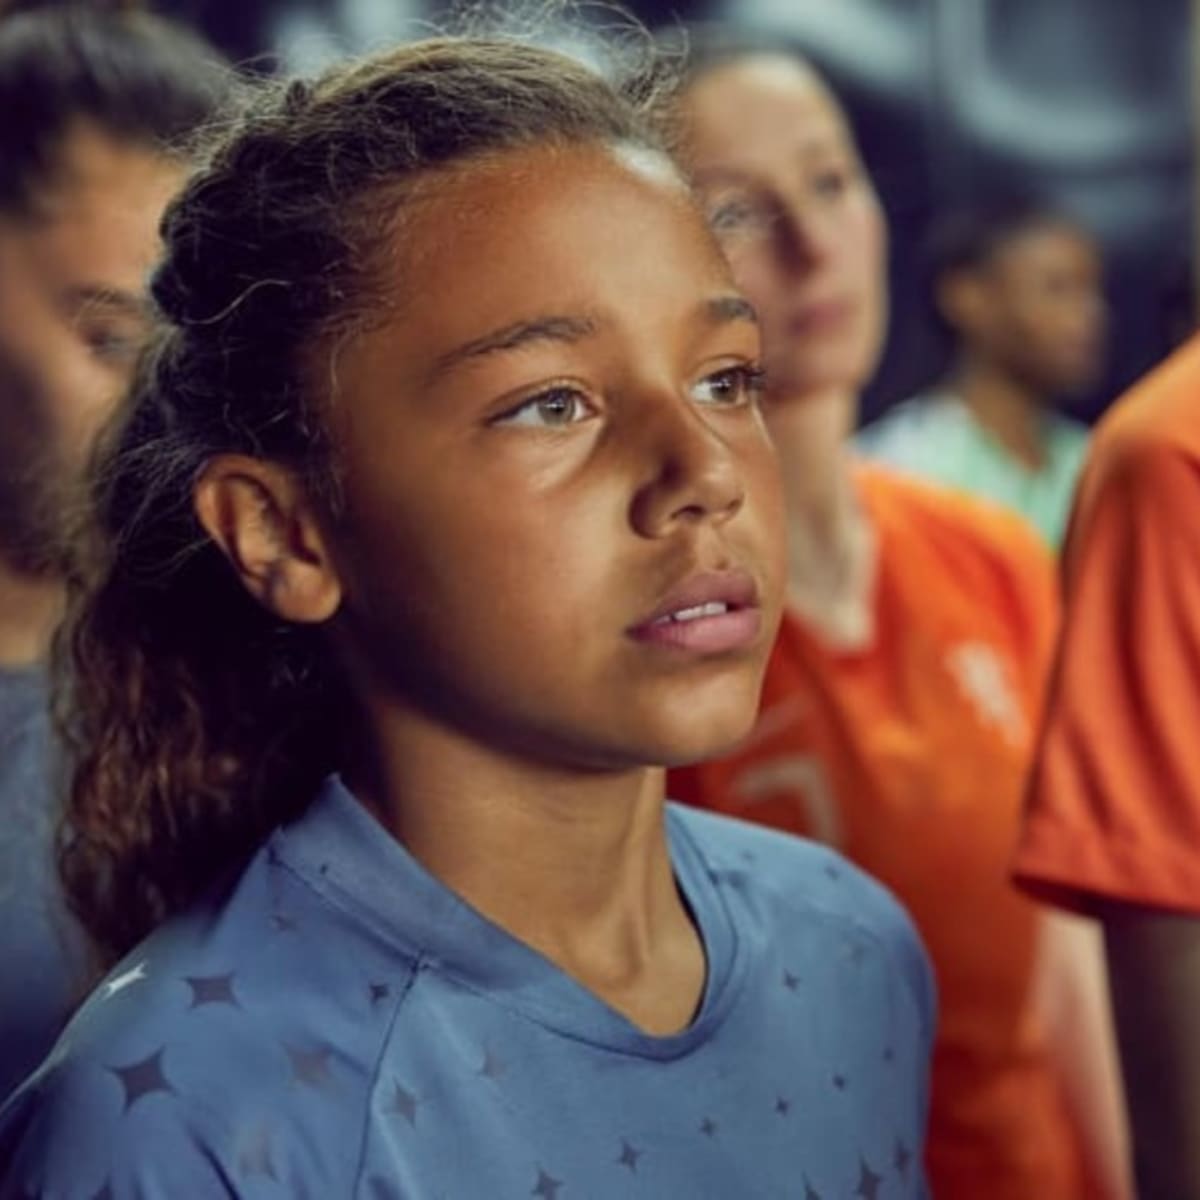 Nike Release Inspirational Further' Advert Ahead Women's World Cup - Illustrated